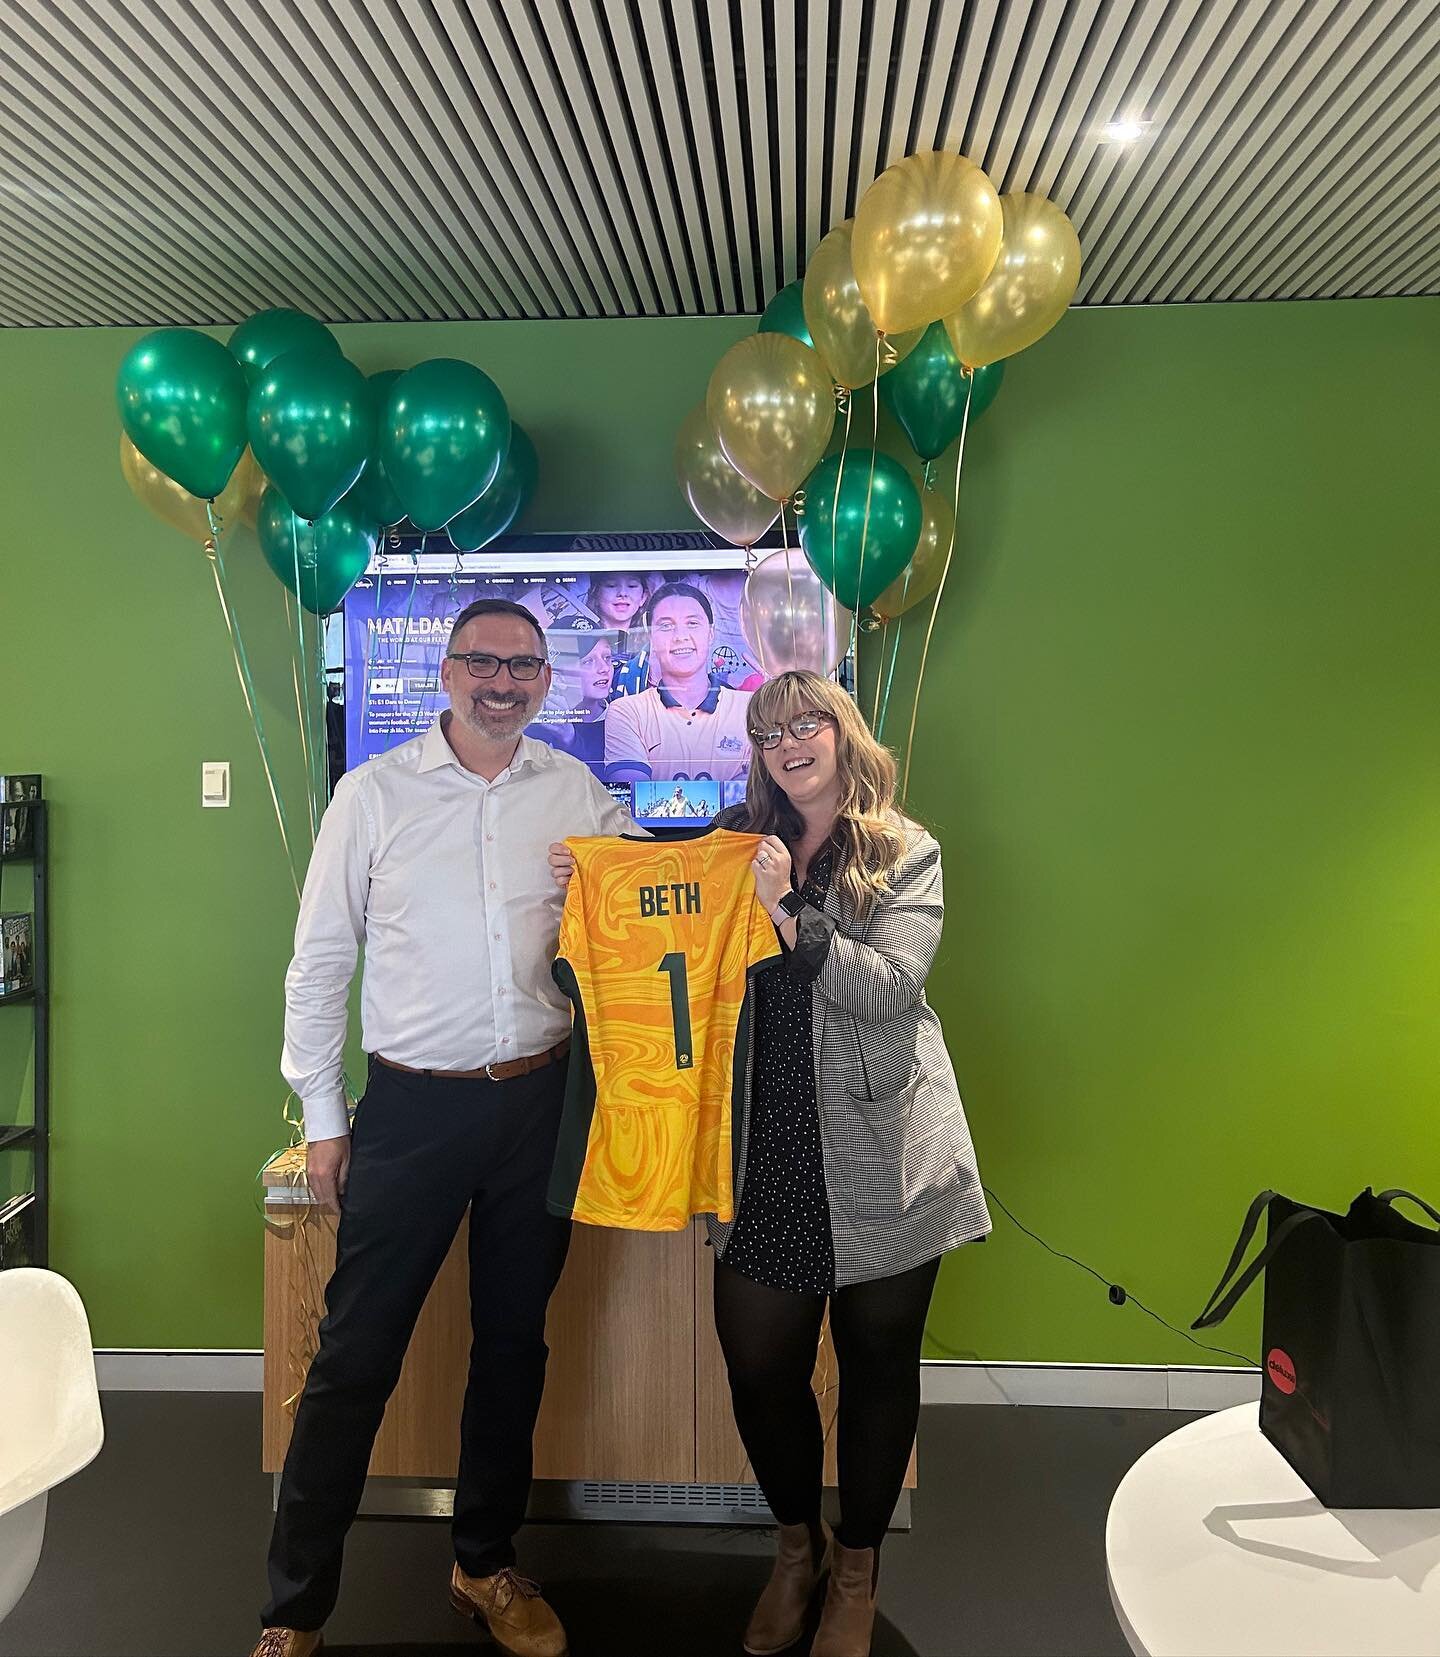 Are you a fan of Australian soccer? Then you must've seen Matildas: The
World at our Feet!
After managing this amazing Disney Australian Original series, we thought Deluxe project manager, Beth Hicks, needed her very own jersey! Thanks Chris Reynolds